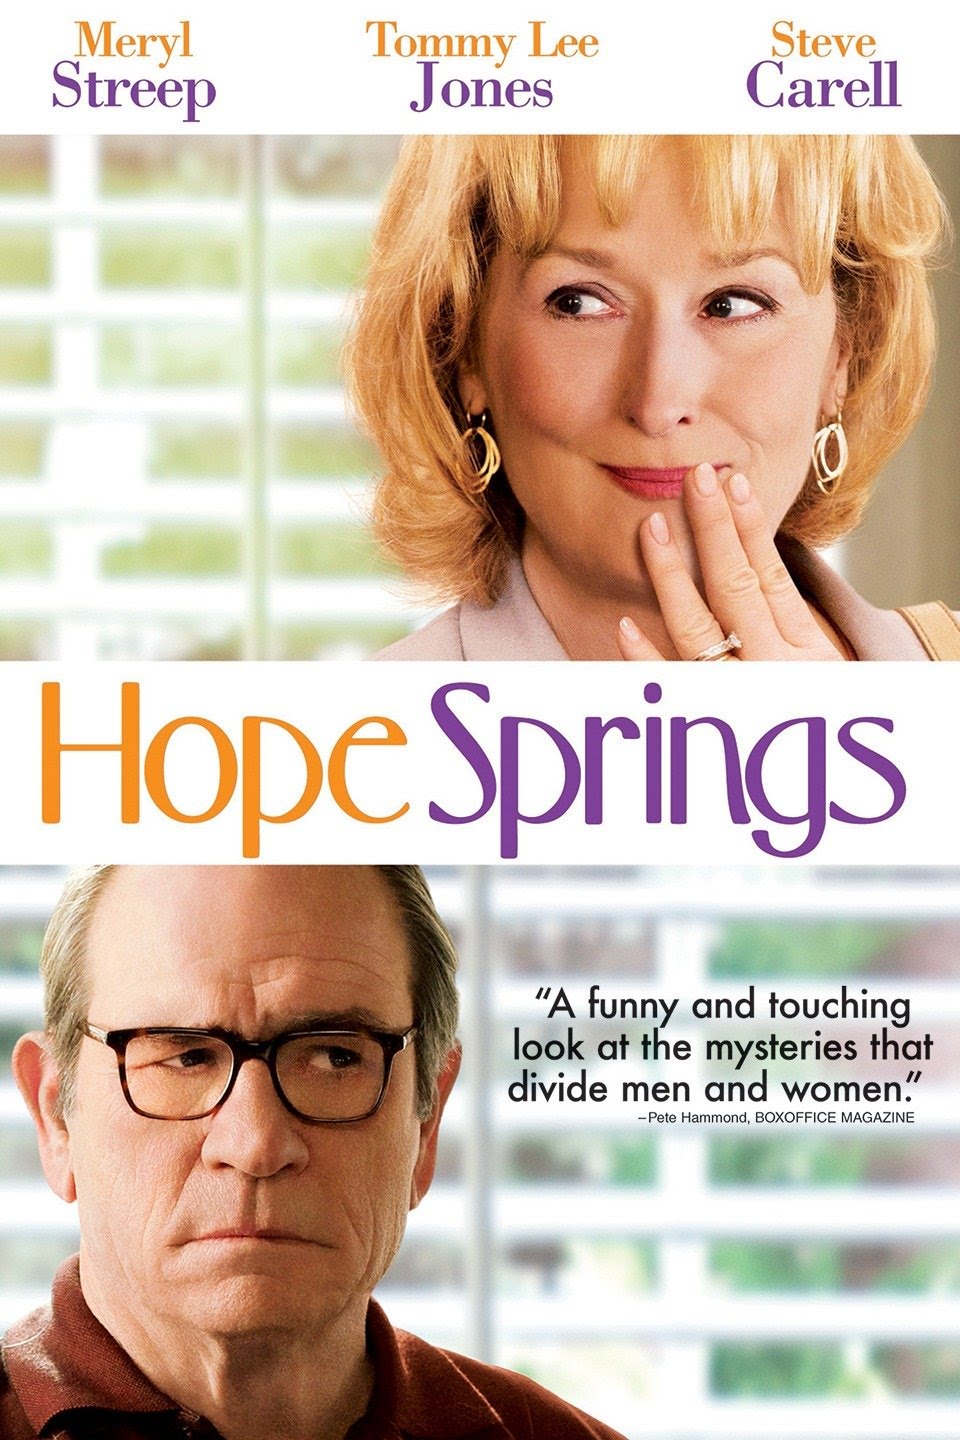 couples counseling movies